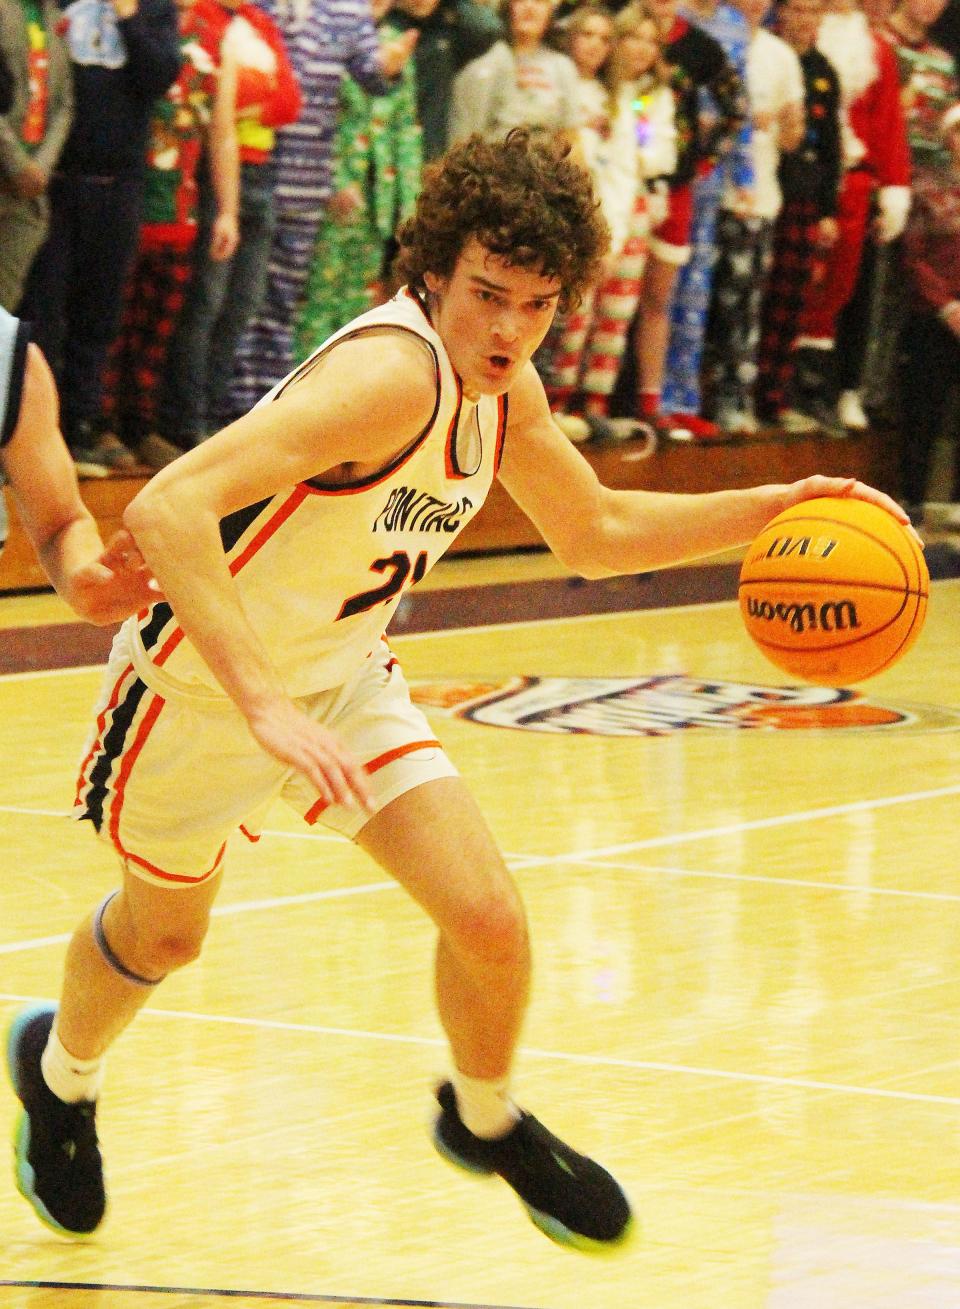 Pontiac junior Riley Weber was named honorable mention to The Associated Press Class 2A all-state team. Weber helped lead the Indians to a program record 27 wins and No. 8 in the final AP rankings.